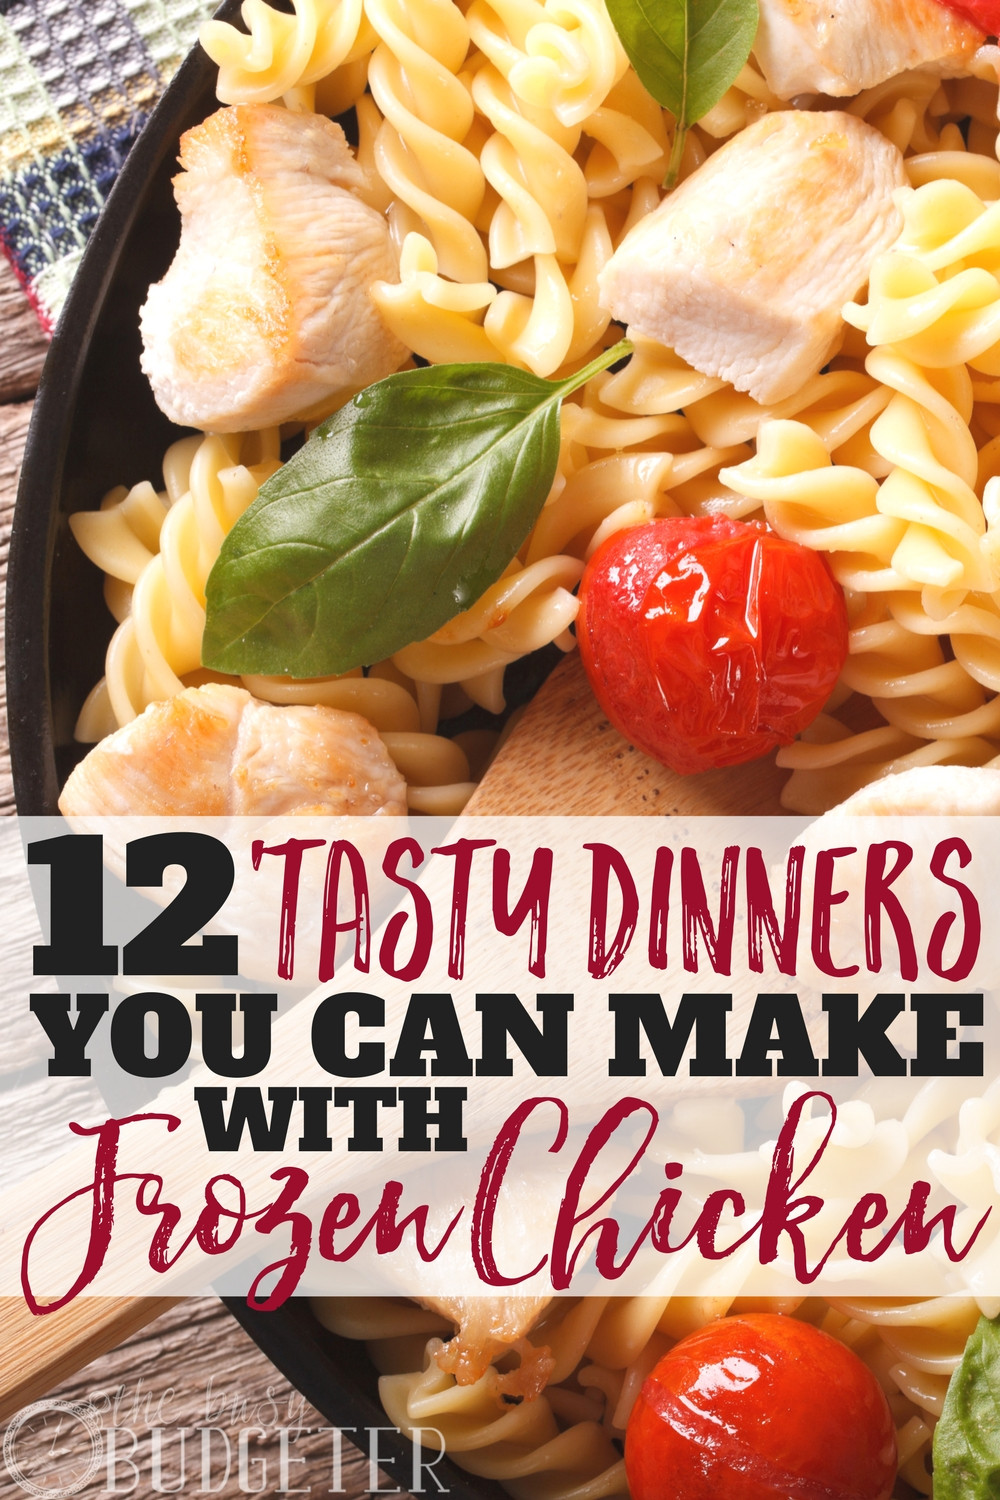 Frozen Chicken Recipes For Dinner
 12 Tasty Dinners You Can Make with Frozen Pre Cooked